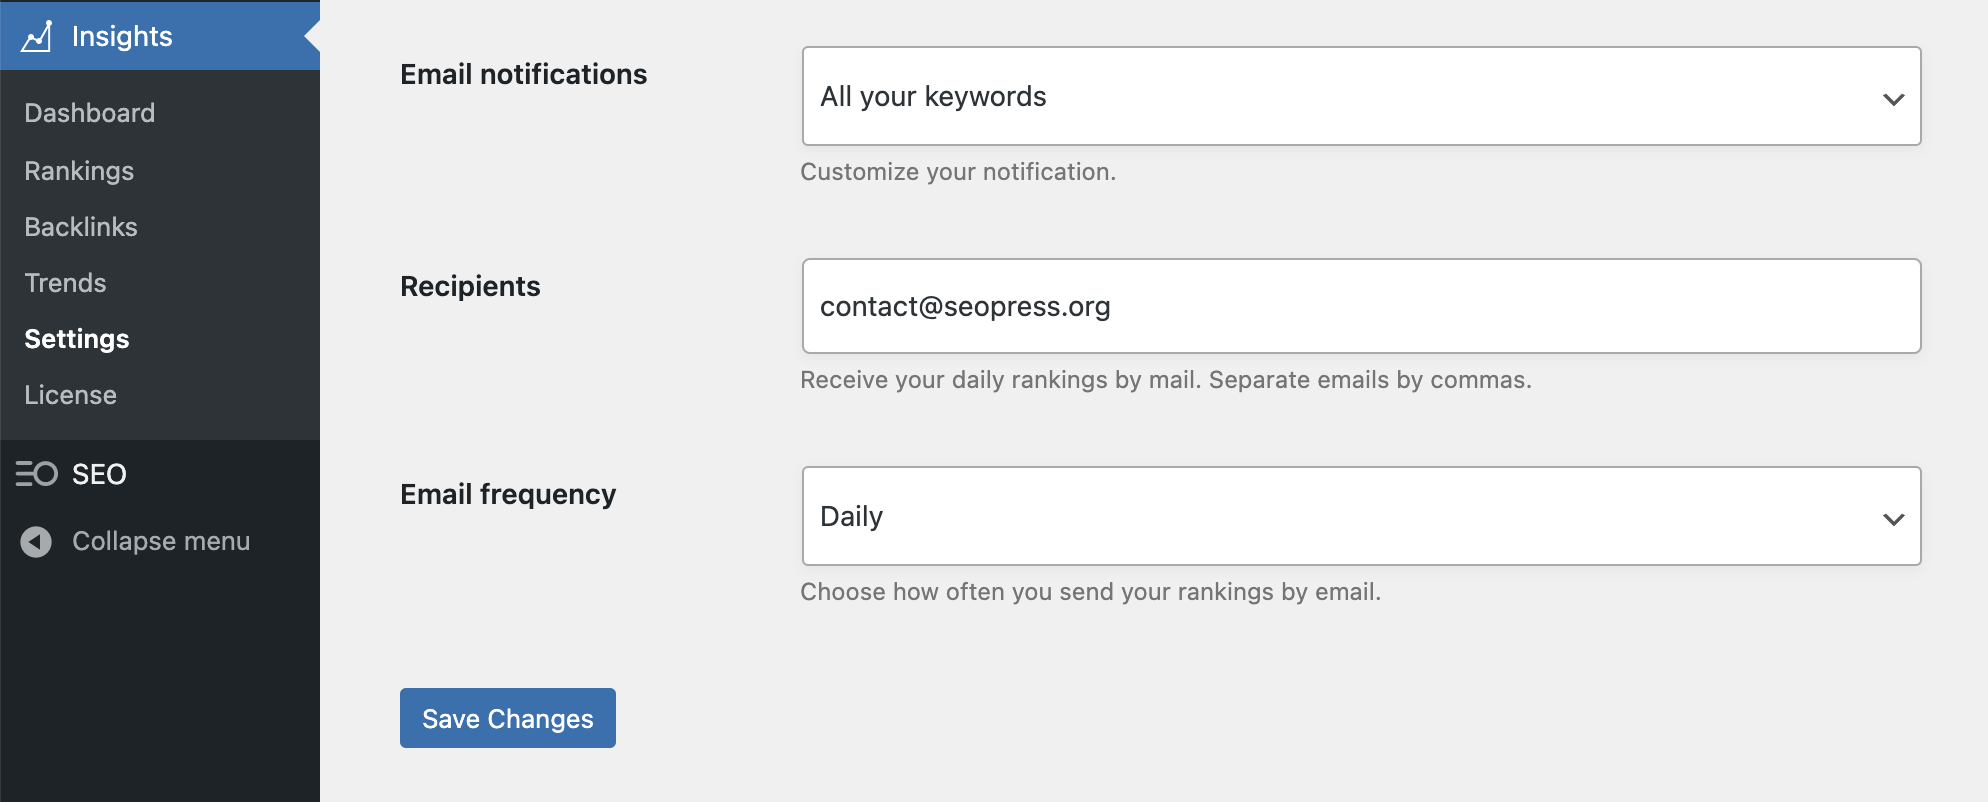 Email notifications settings - SEOPress Insights